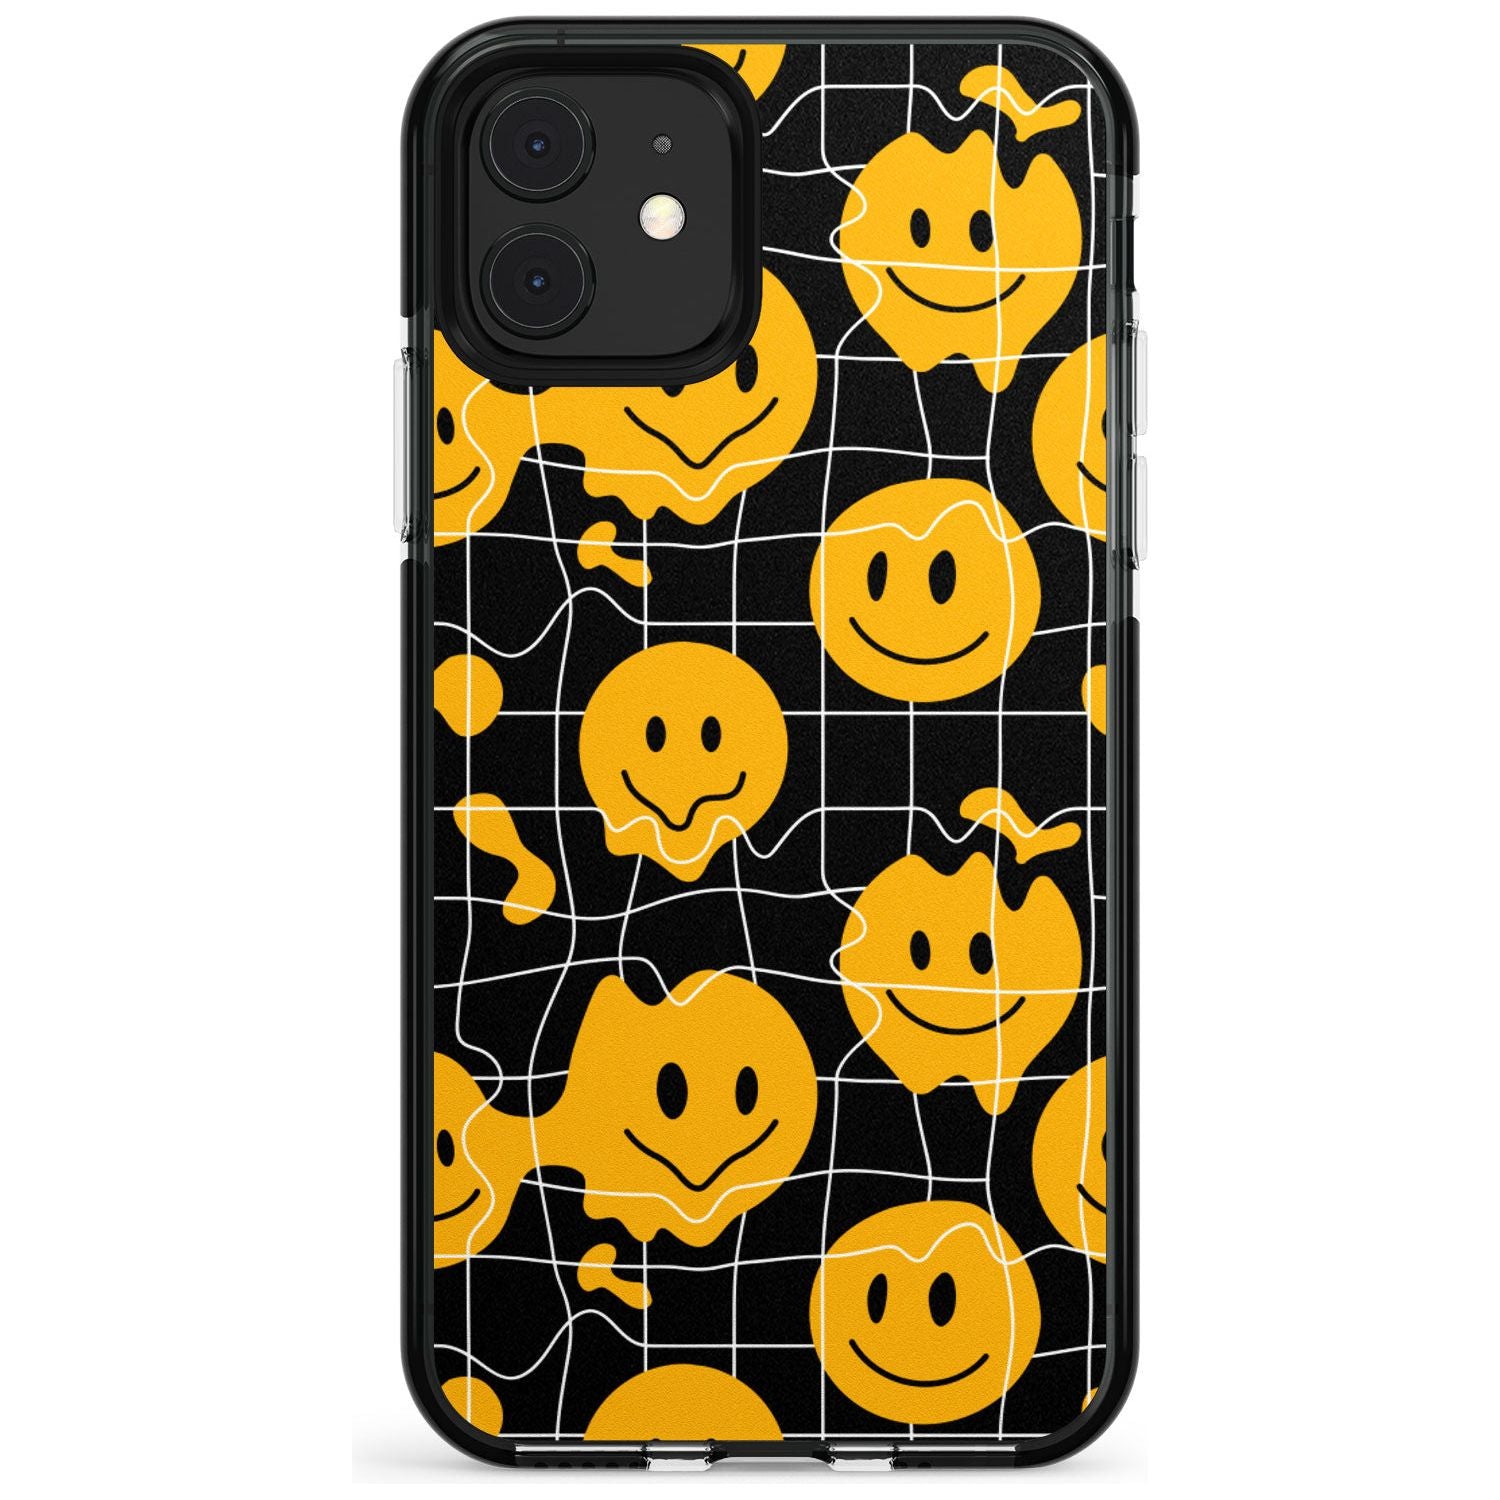 Acid Face Grid Pattern Black Impact Phone Case for iPhone 11 Pro Max